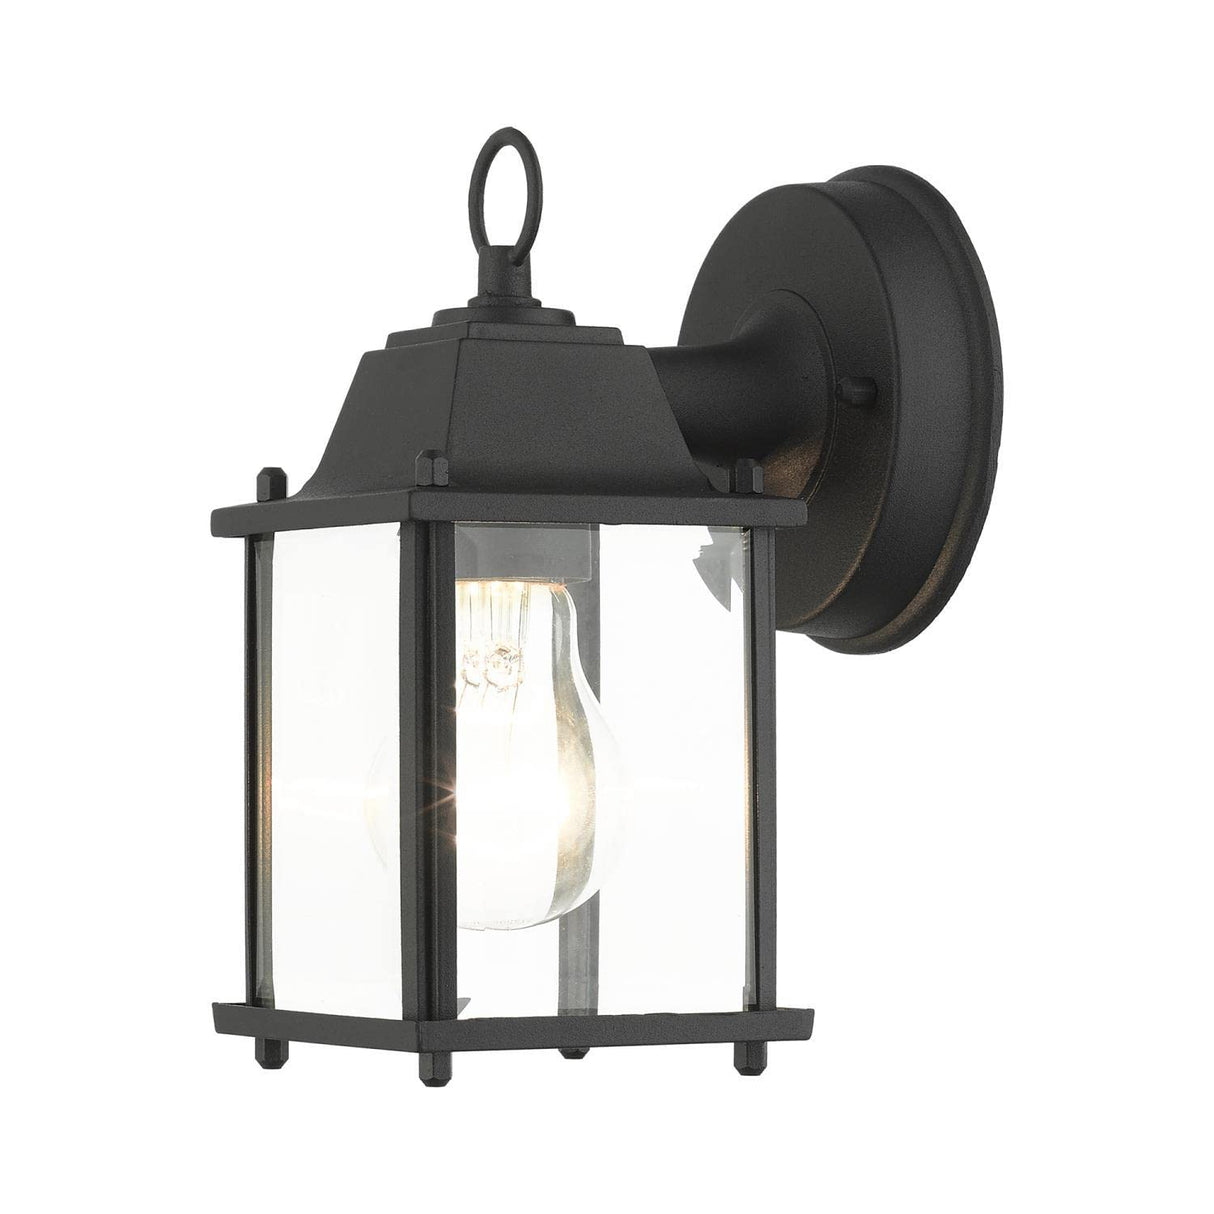 Livex Lighting 7506-14 Frontenac Traditional 1-Light Outdoor Wall Lantern with Clear Beveled Glass Shades, 8" x 4.75" x 8", Black